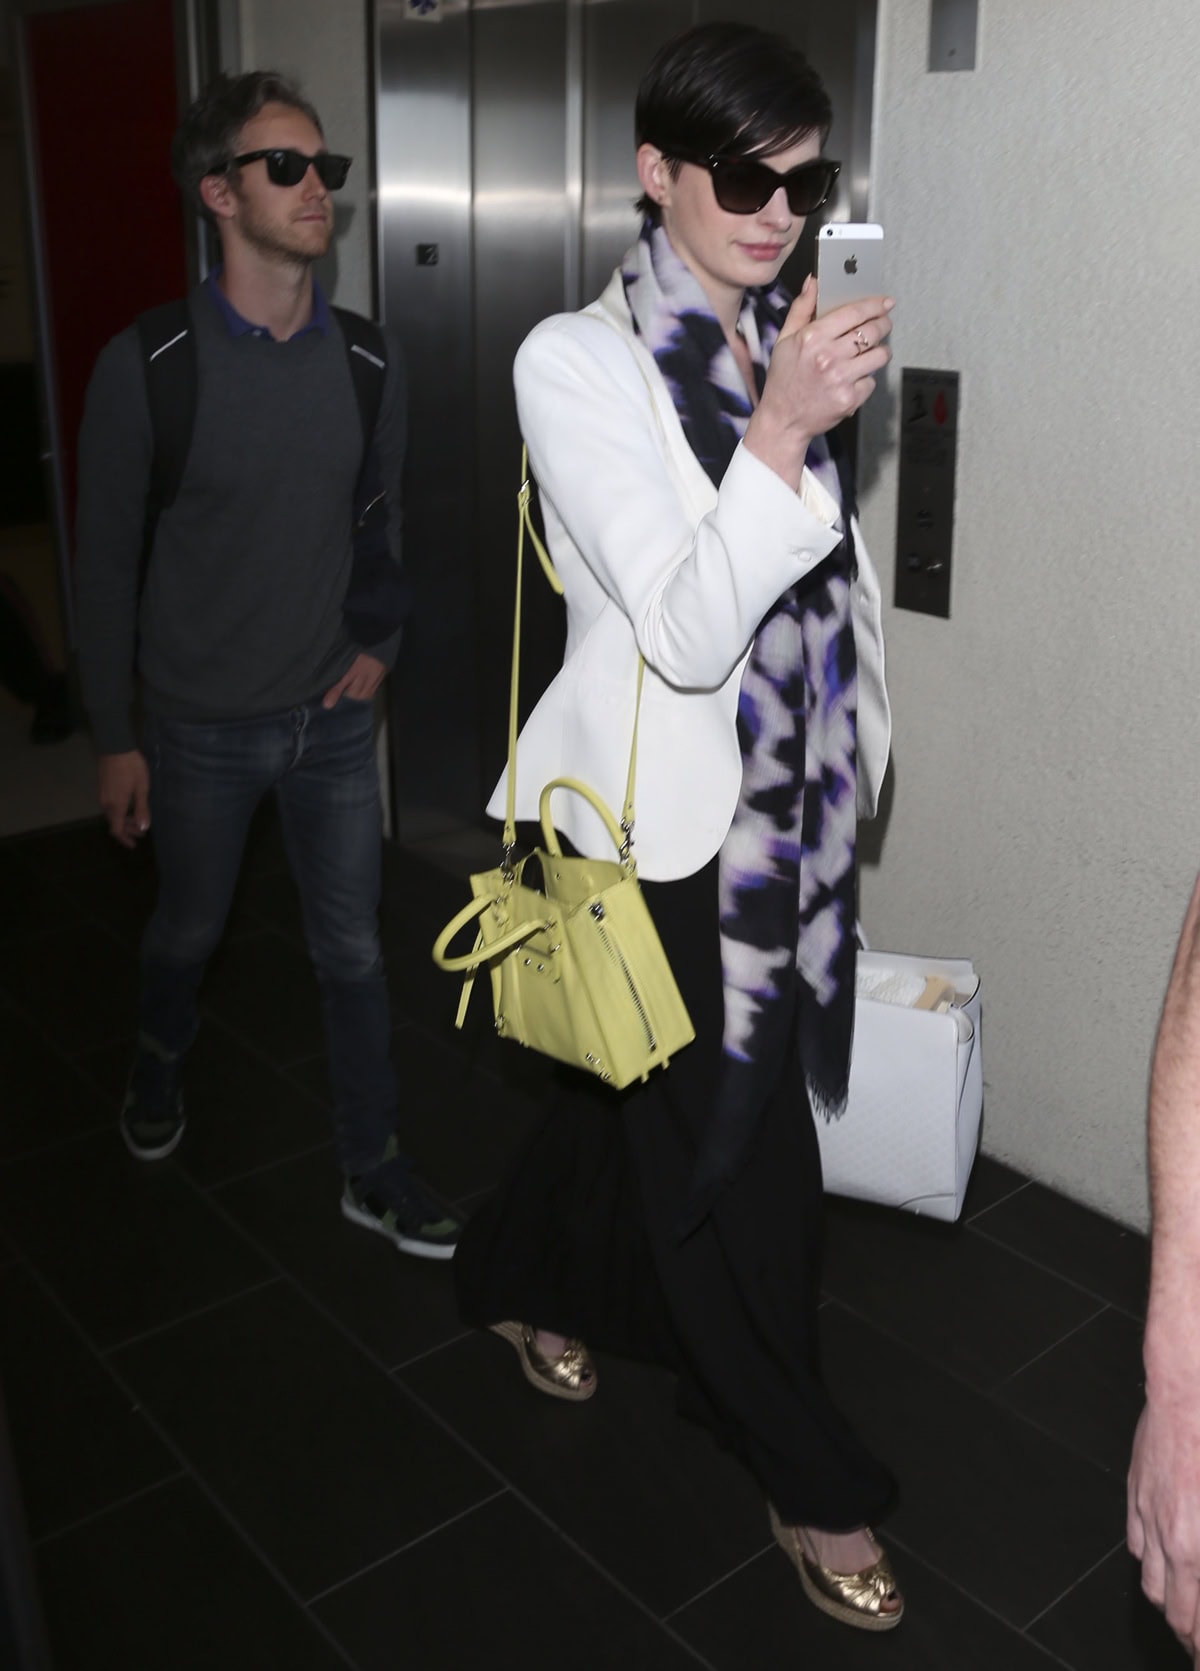 Anne Hathaway has some fun with her iPhone camera while arriving at LAX Airport on March 10, 2014, with her husband Adam Shulman following a few paces behind